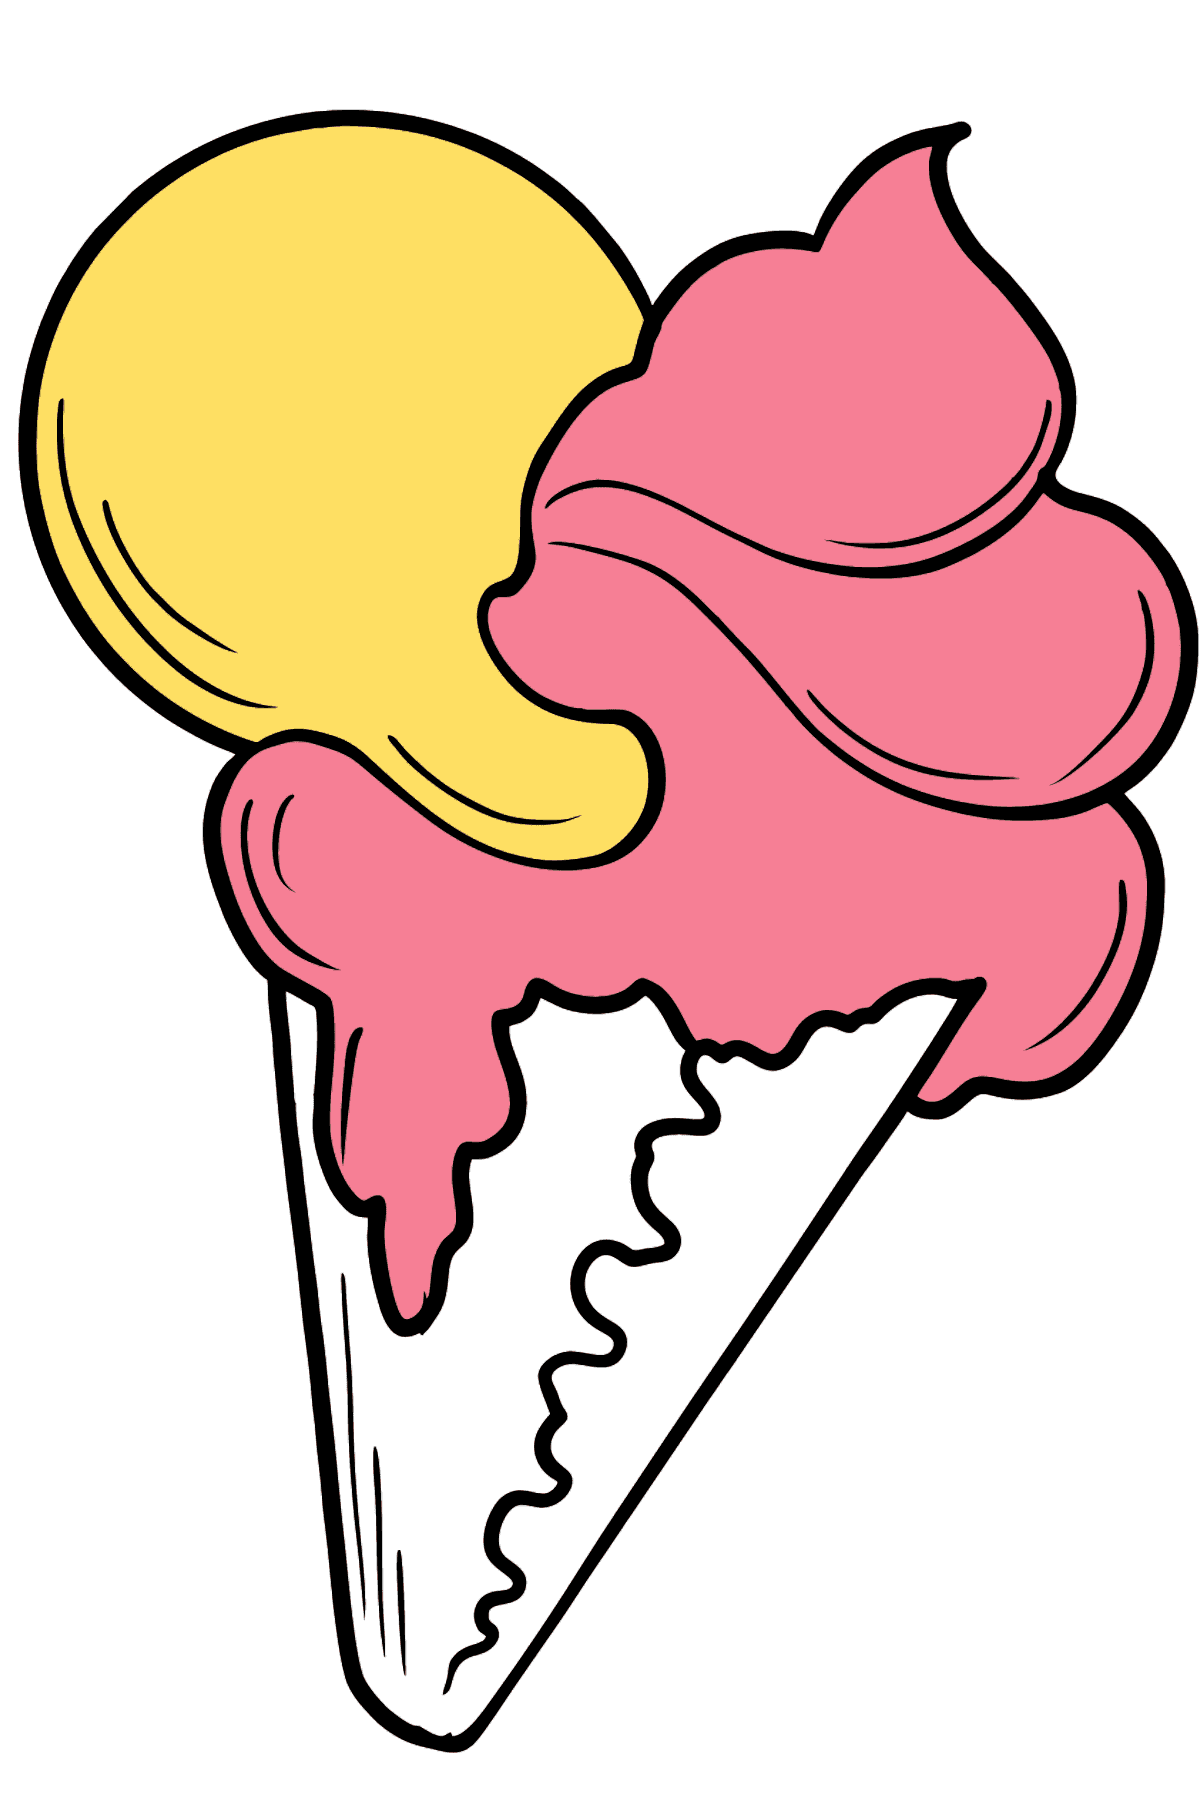 Raspberry and Banana Horn coloring page - Coloring Pages for Kids